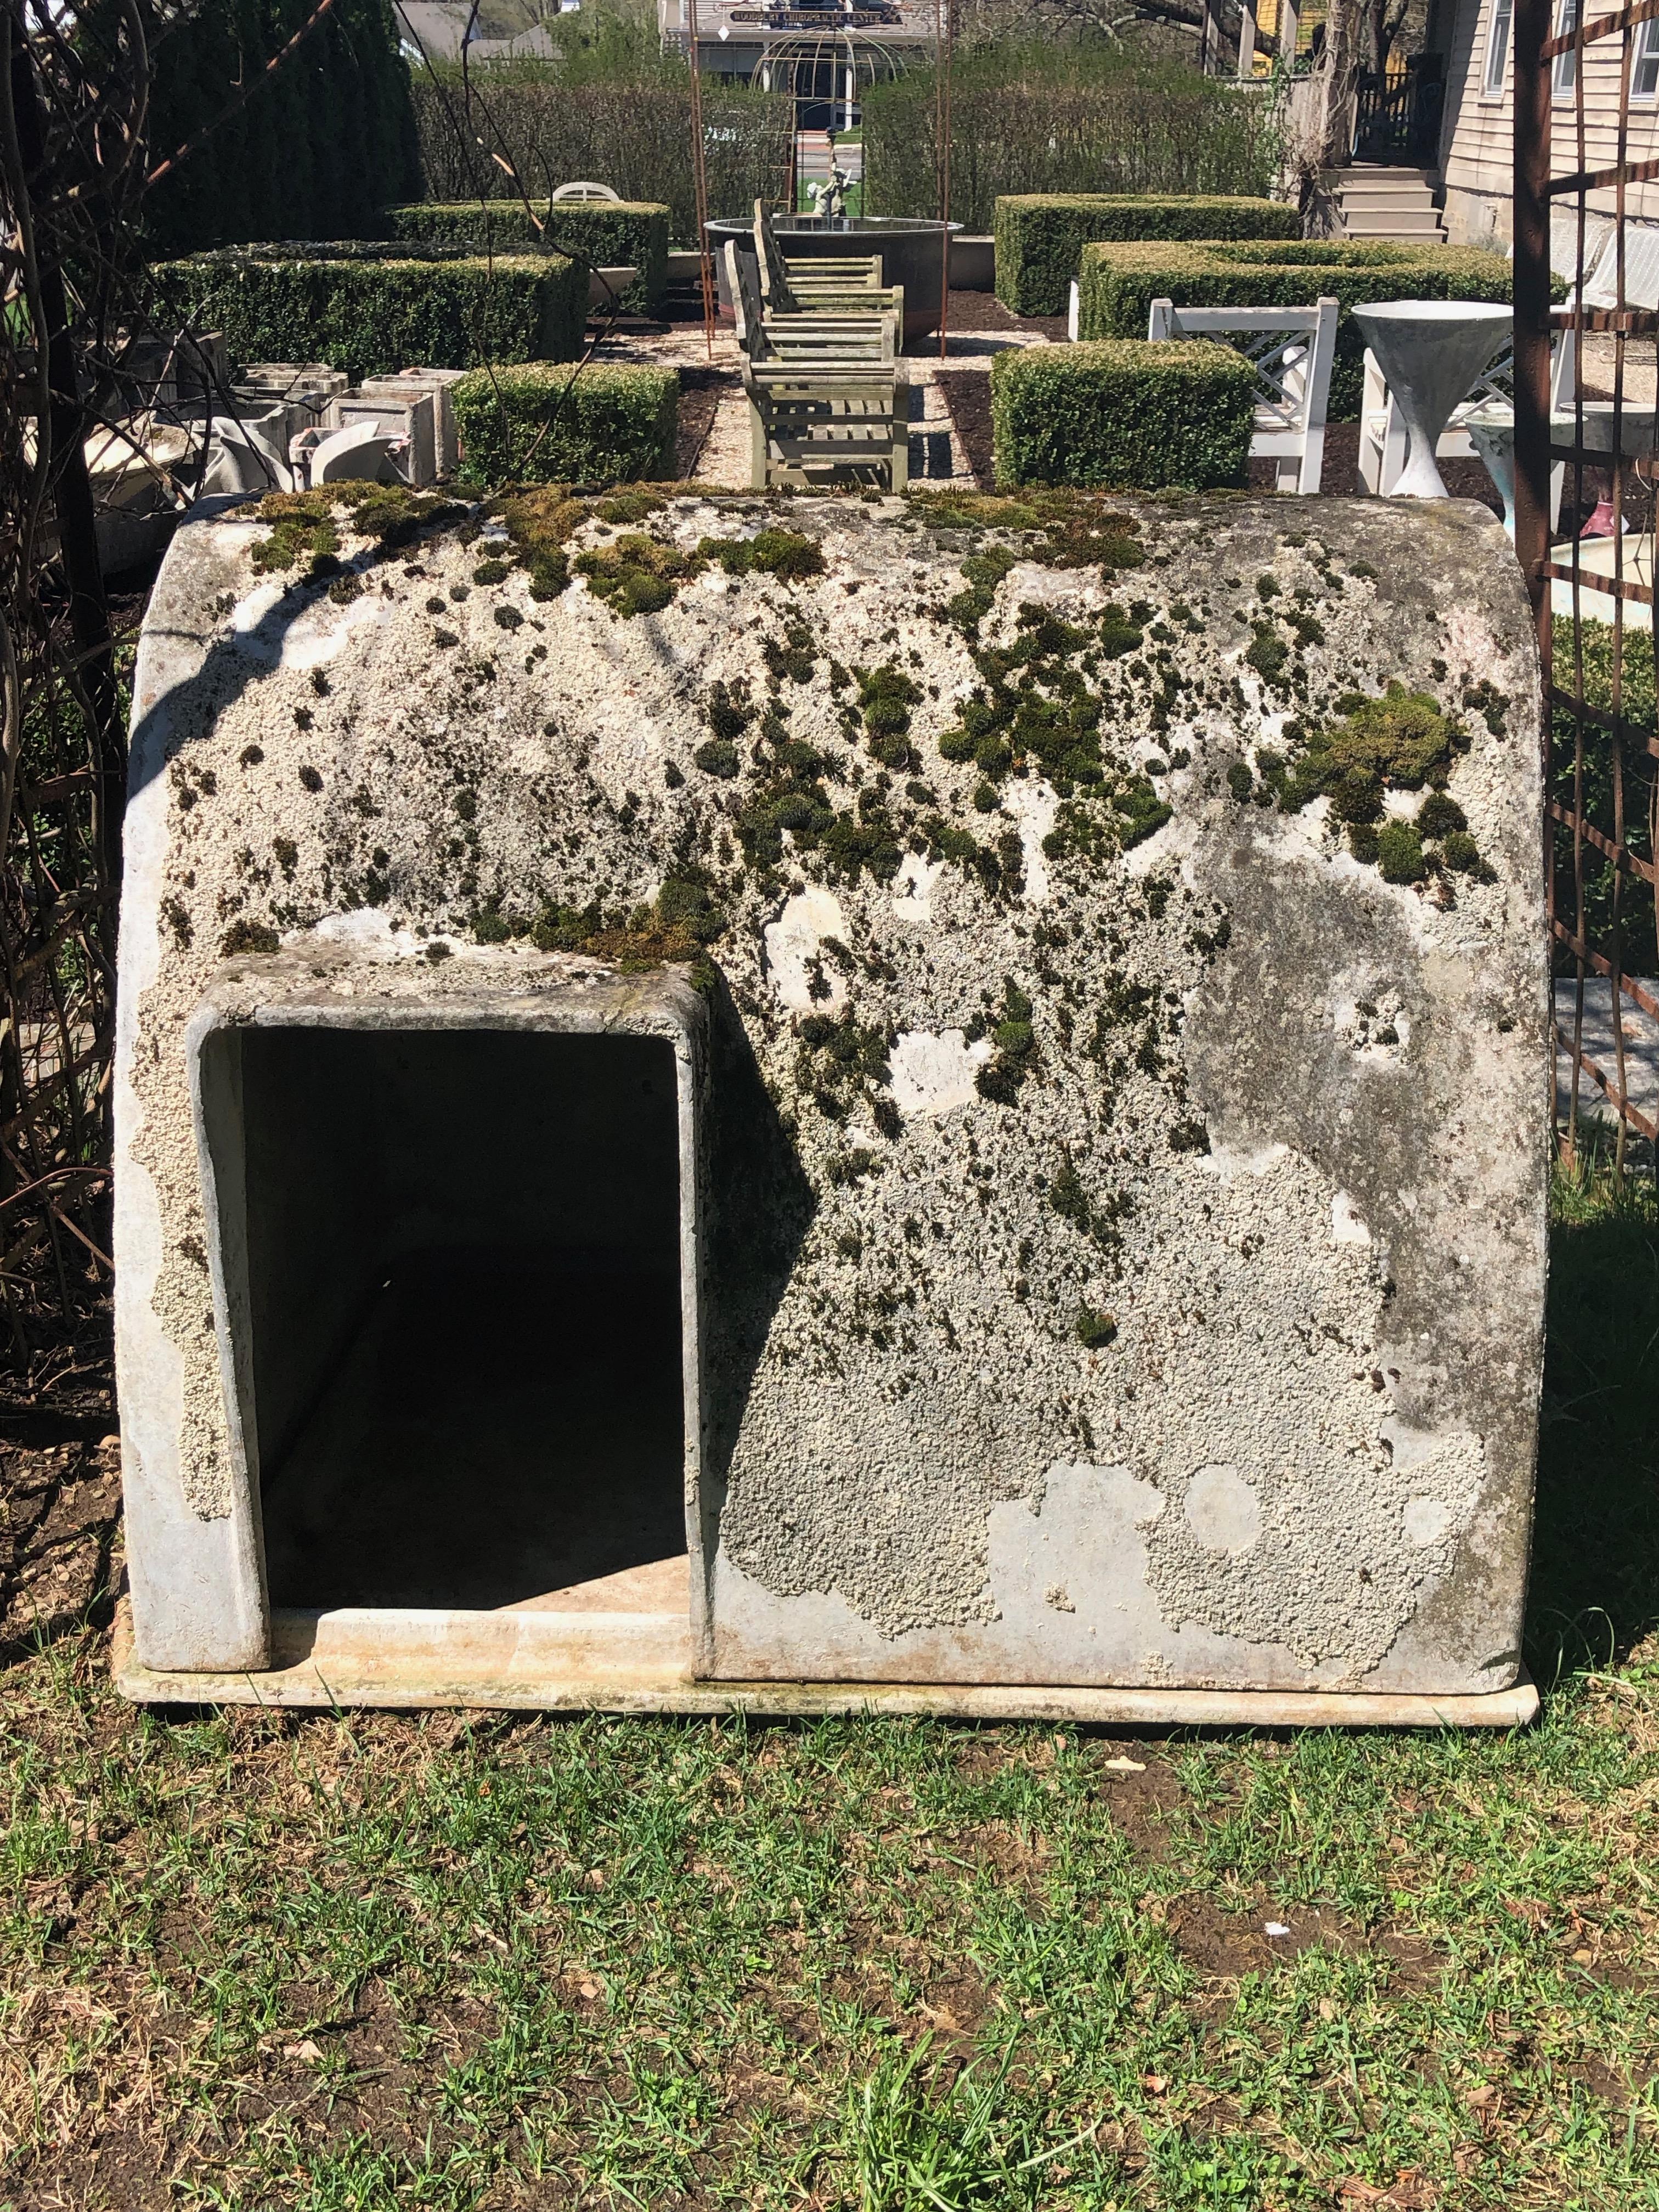 It's rare to see Willy Guhl dog houses, but we've never come across one with its original pan before. Originally made in two sizes, this is the larger of the two. This one is a beauty, loaded with moss and lichen, and in very good condition overall.